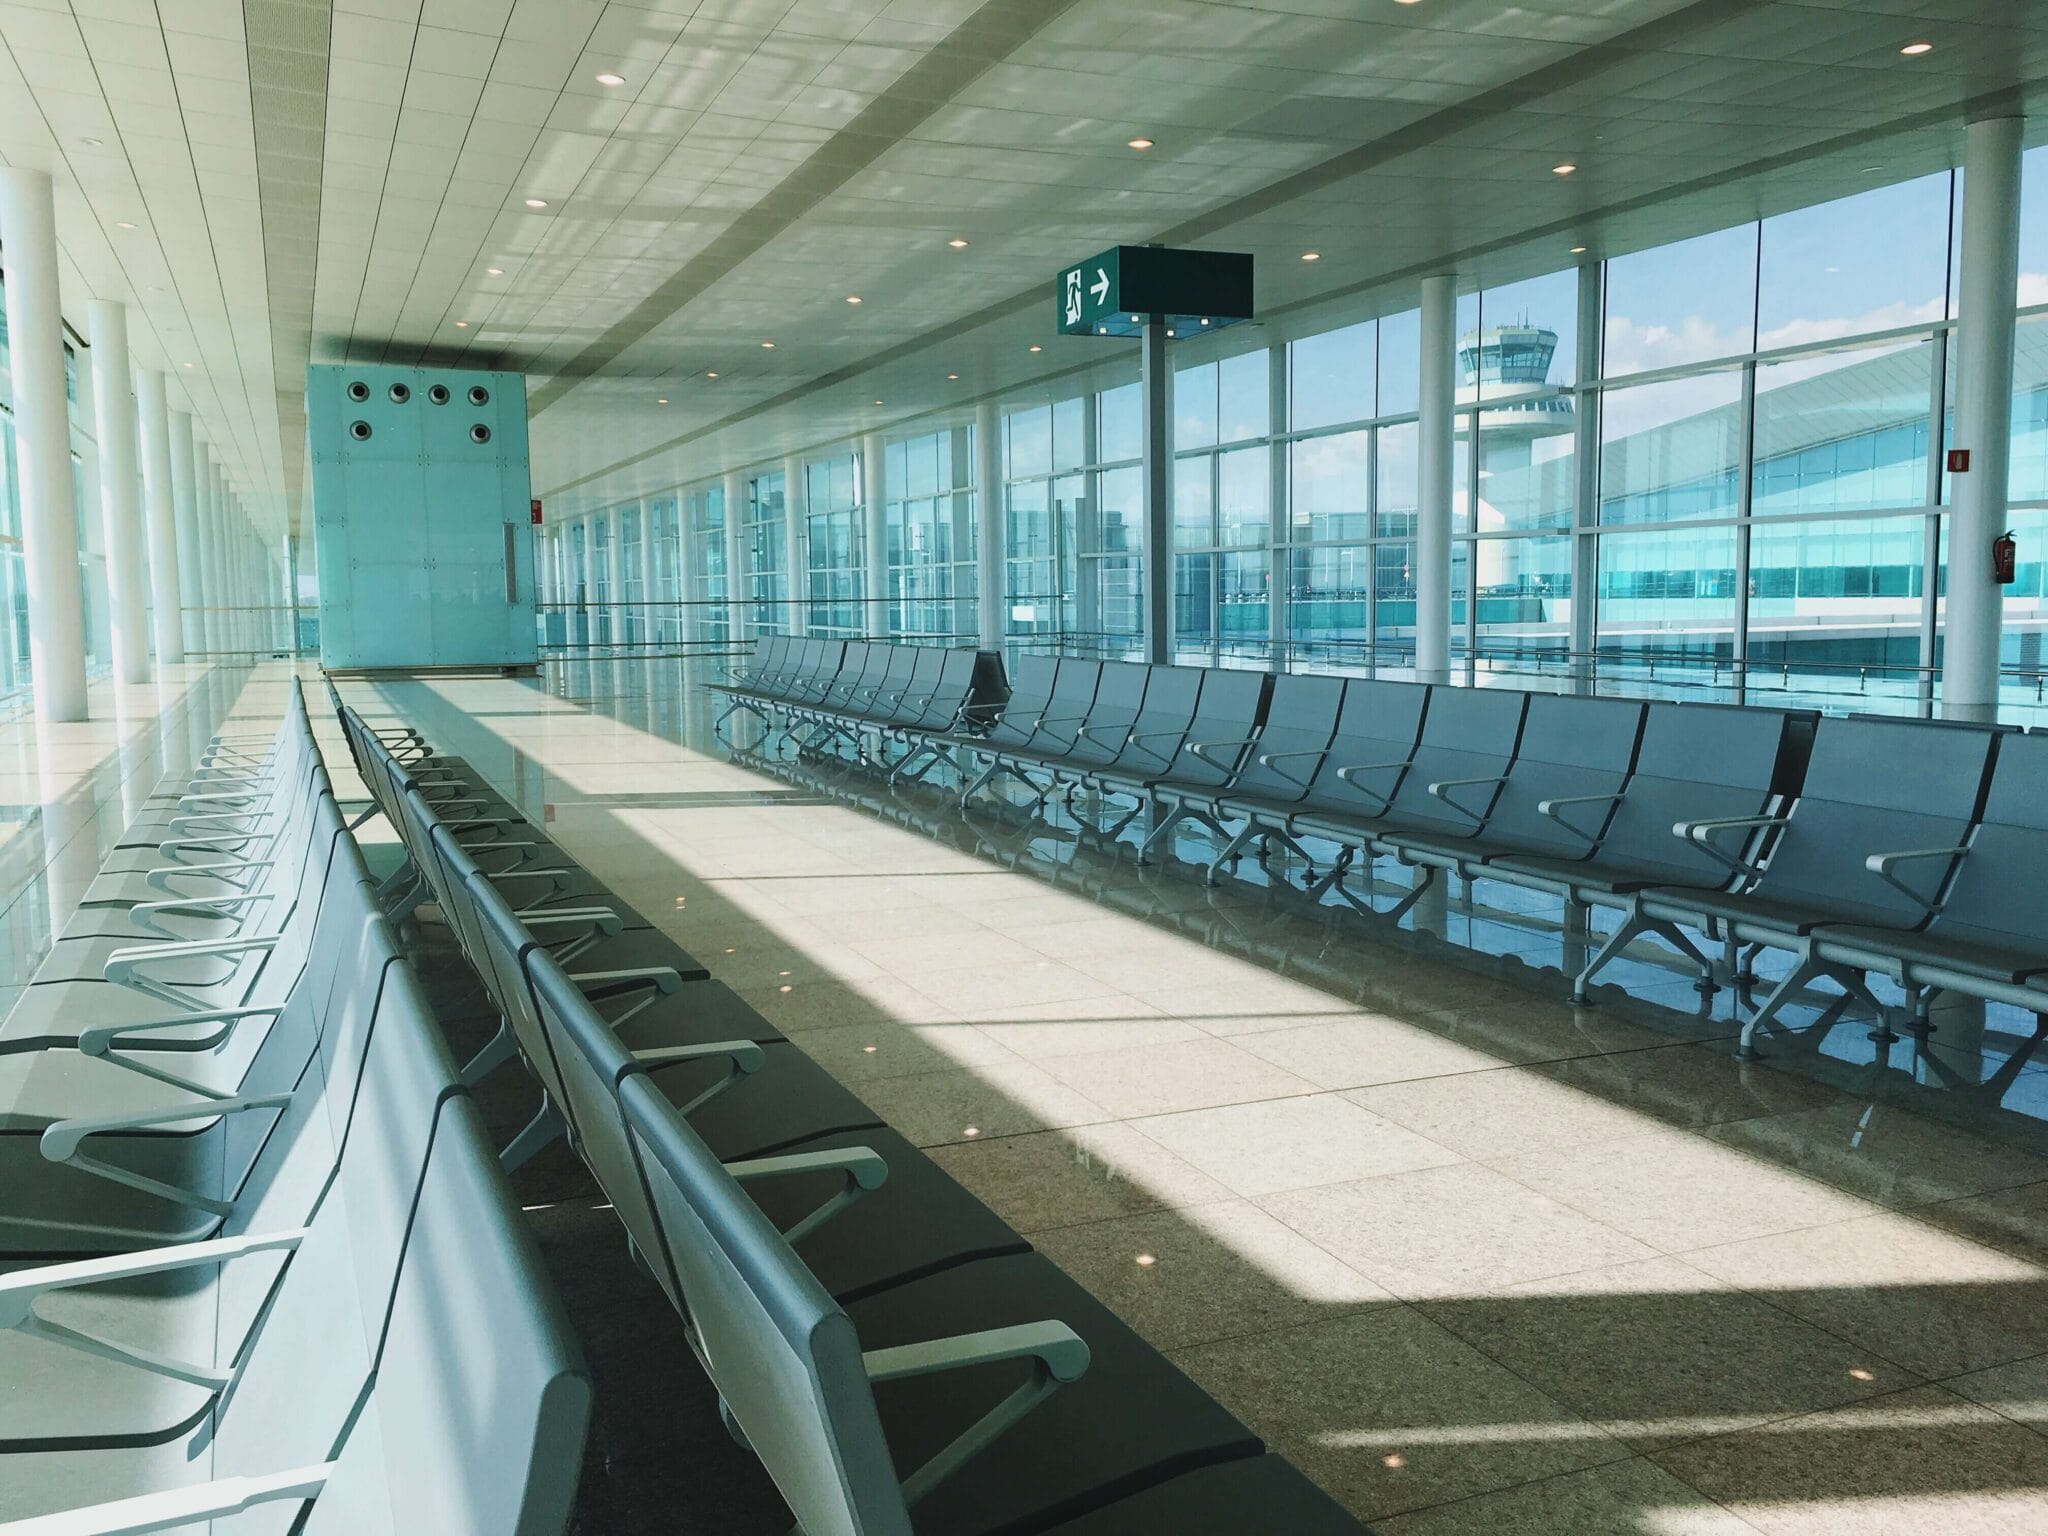 An empty hallway in an airport | Capital Region Airport Authority Public Safety Officer position